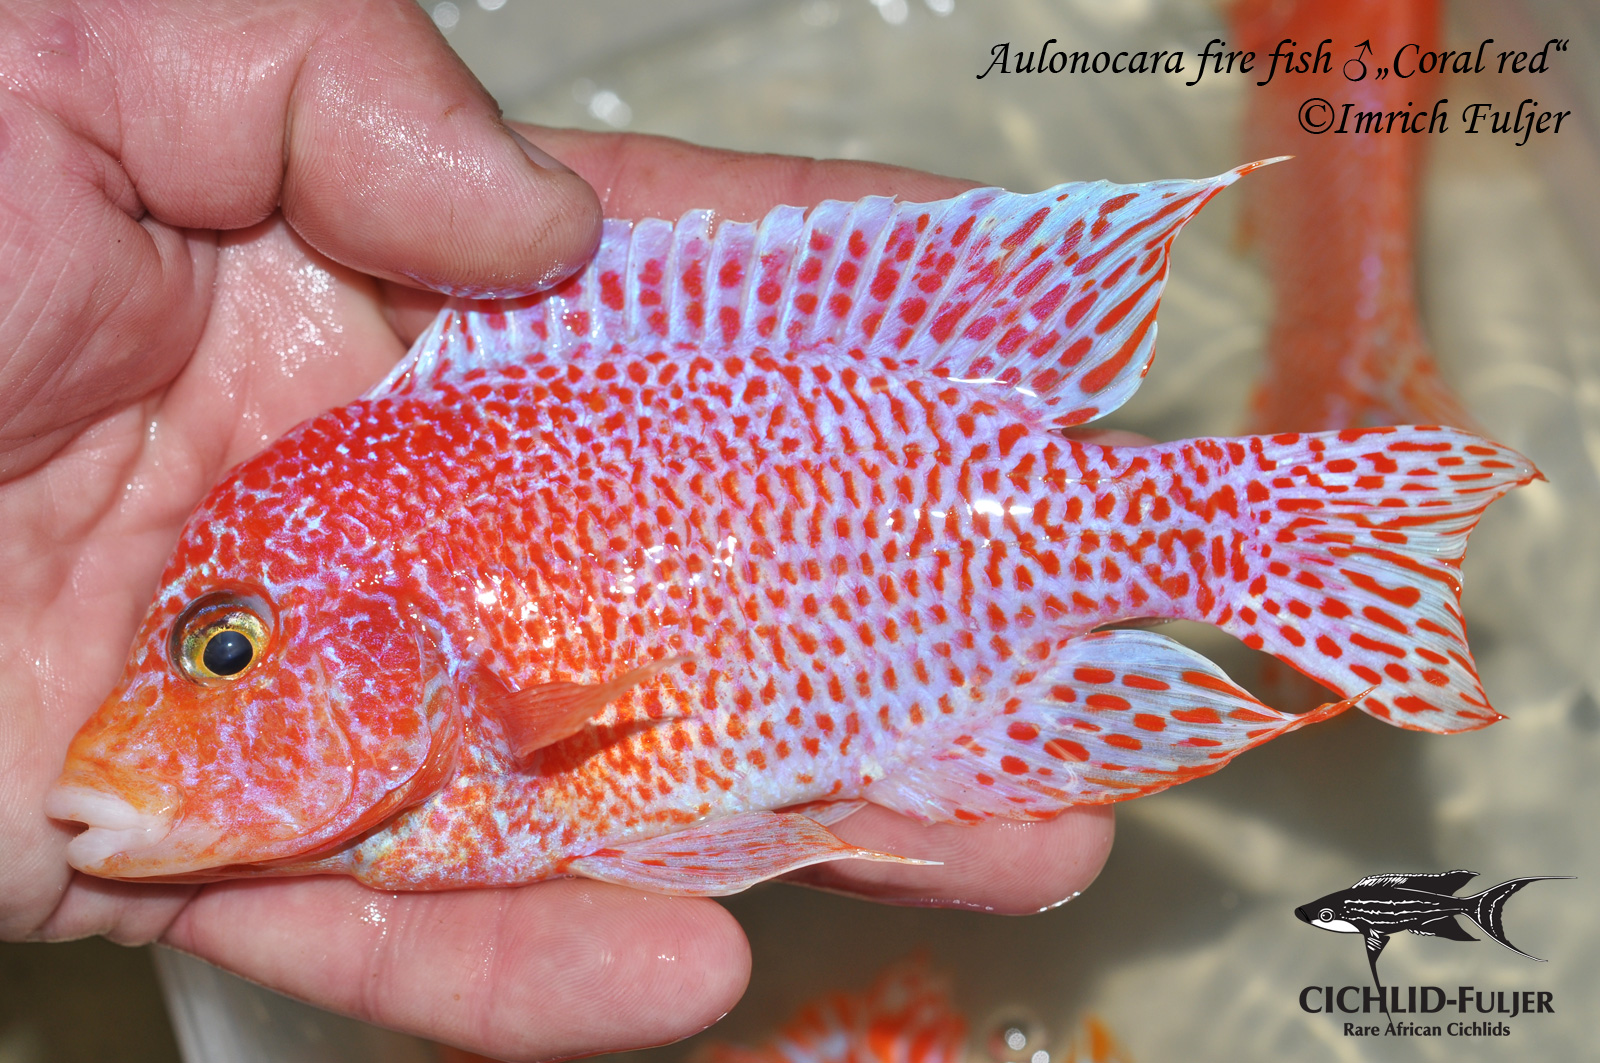 Aulonocara fire fishCoral red 2